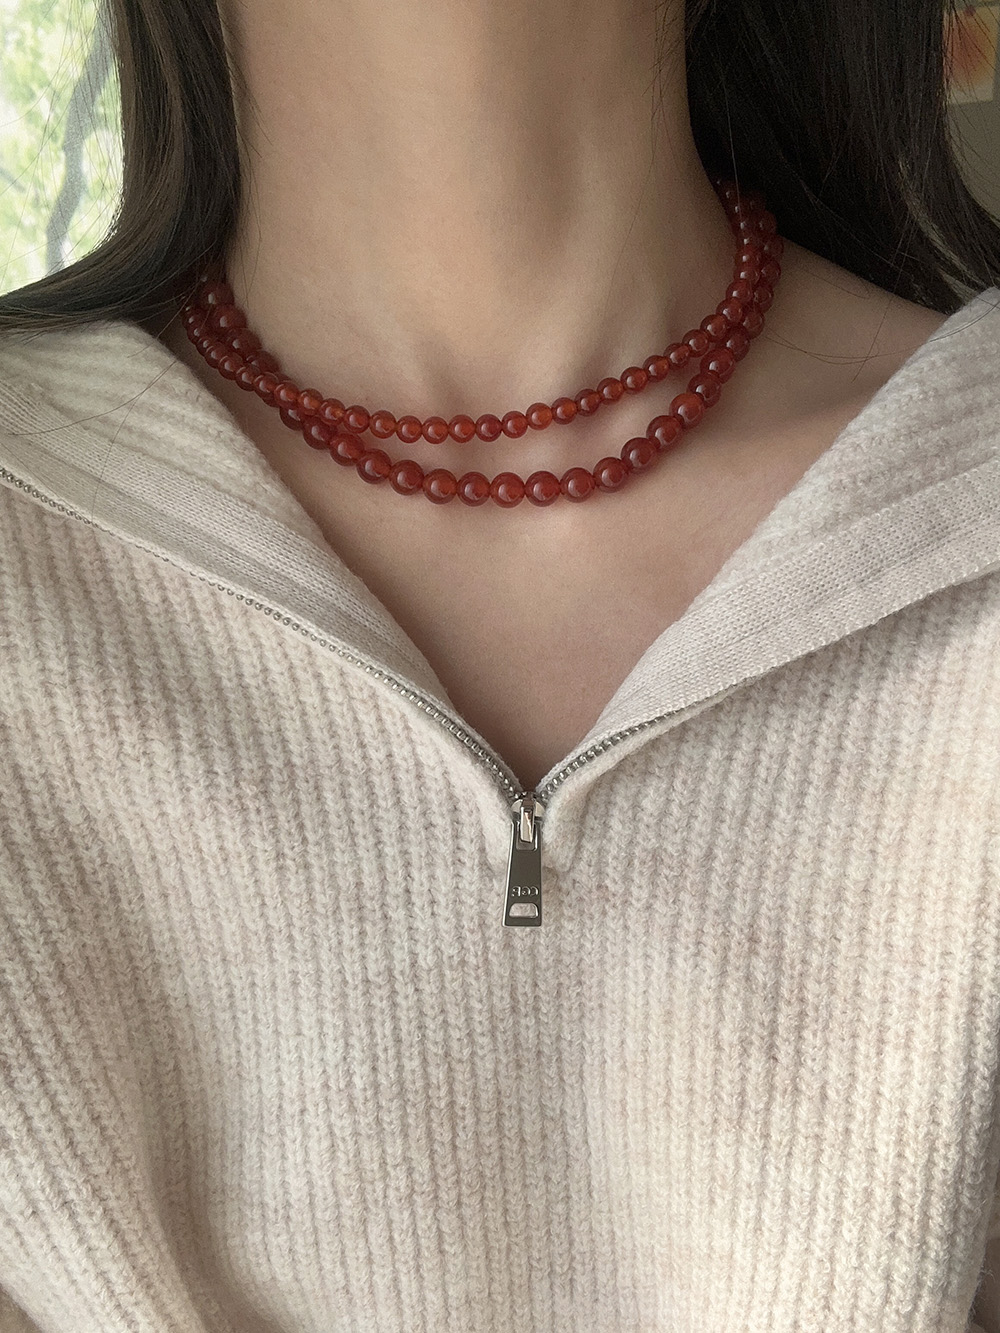 [92.5silver] Red onyx necklace (2size)